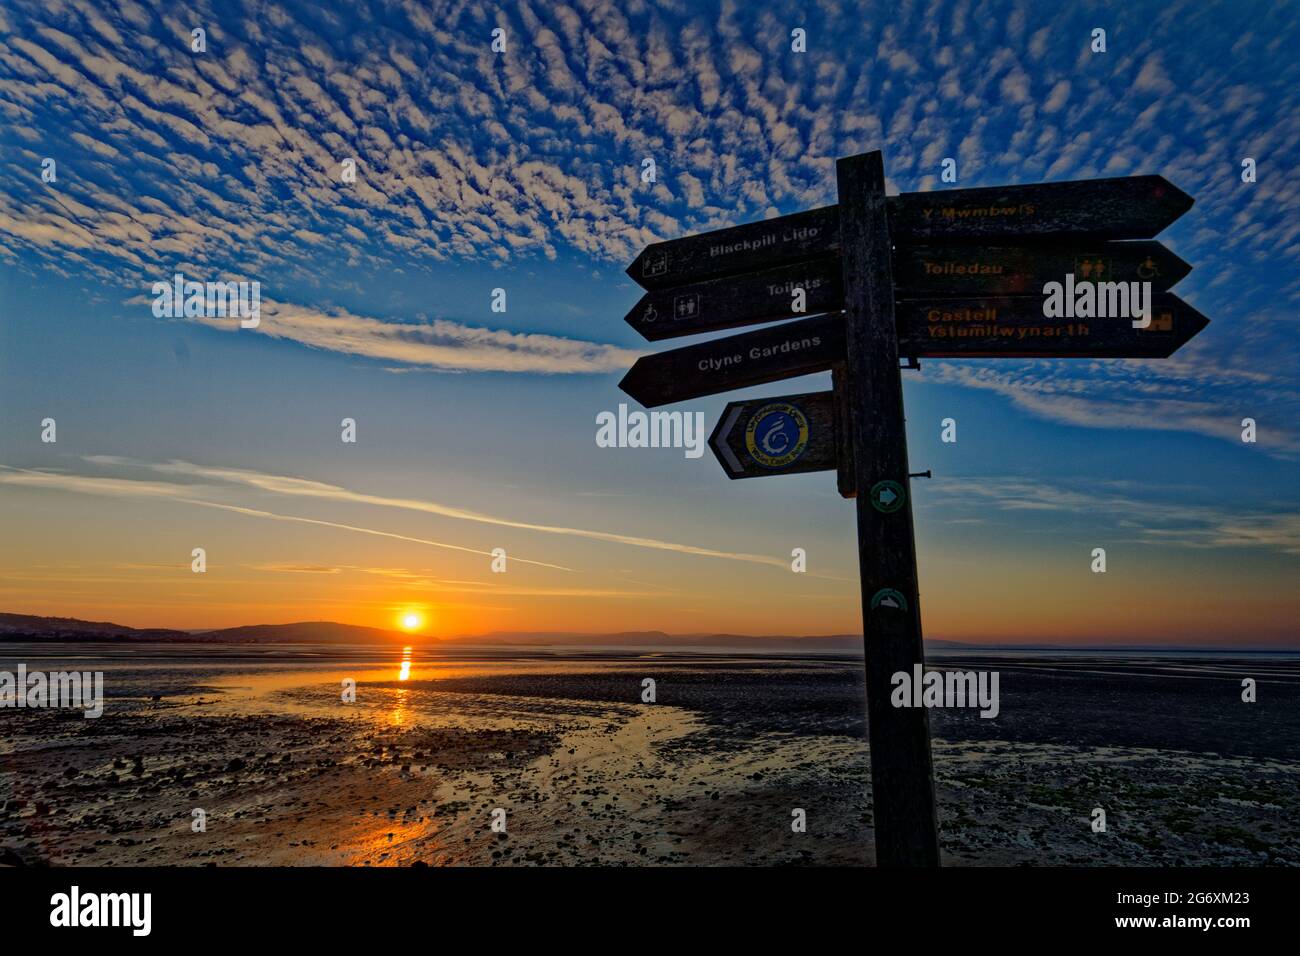 Wooden direction signs by the promenade in West Cross, as the sun rises marking the beginning of the meteorological summer, Swansea Bay, Wales, UK. Tu Stock Photo